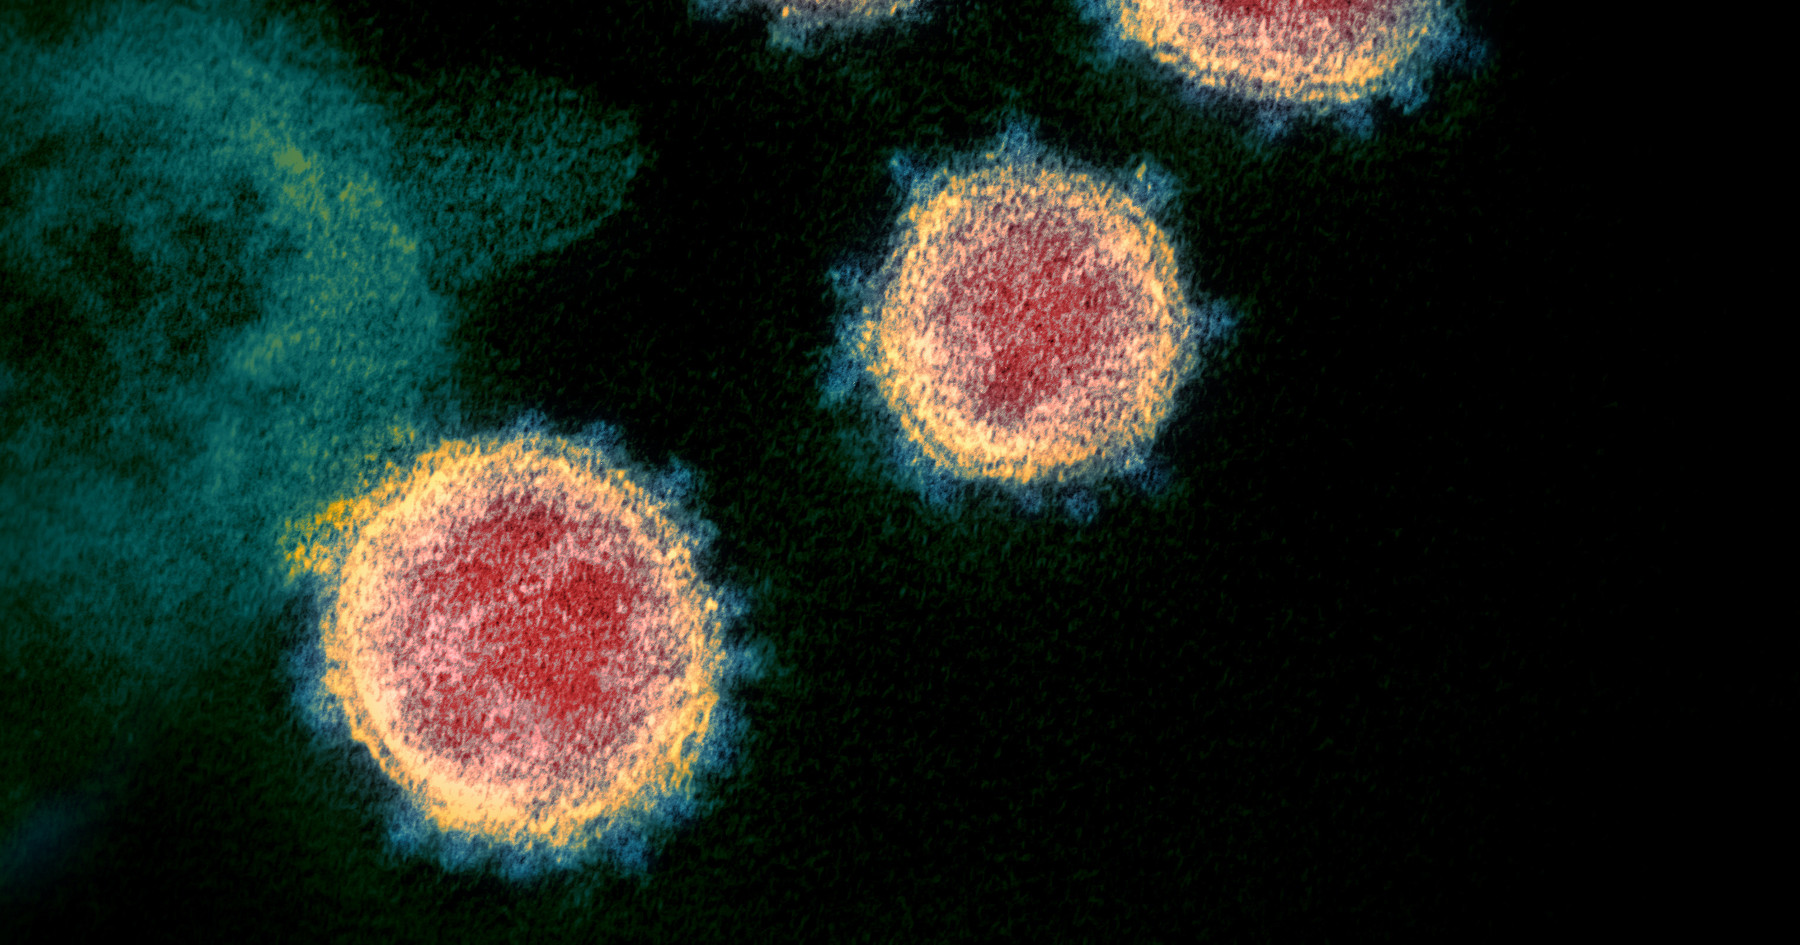 Electron microscope image of SARS-CoV-2 virus particles. Virus particles are shown emerging from the surface of cells cultured in the lab. Image captured and colourized at NIAID’s Rocky Mountain Laboratories in Hamilton, Montana. Photo by: NIAID. Creative Commons CC BY 2.0 DEED Attribution 2.0 Generic license: https://creativecommons.org/licenses/by/2.0/.